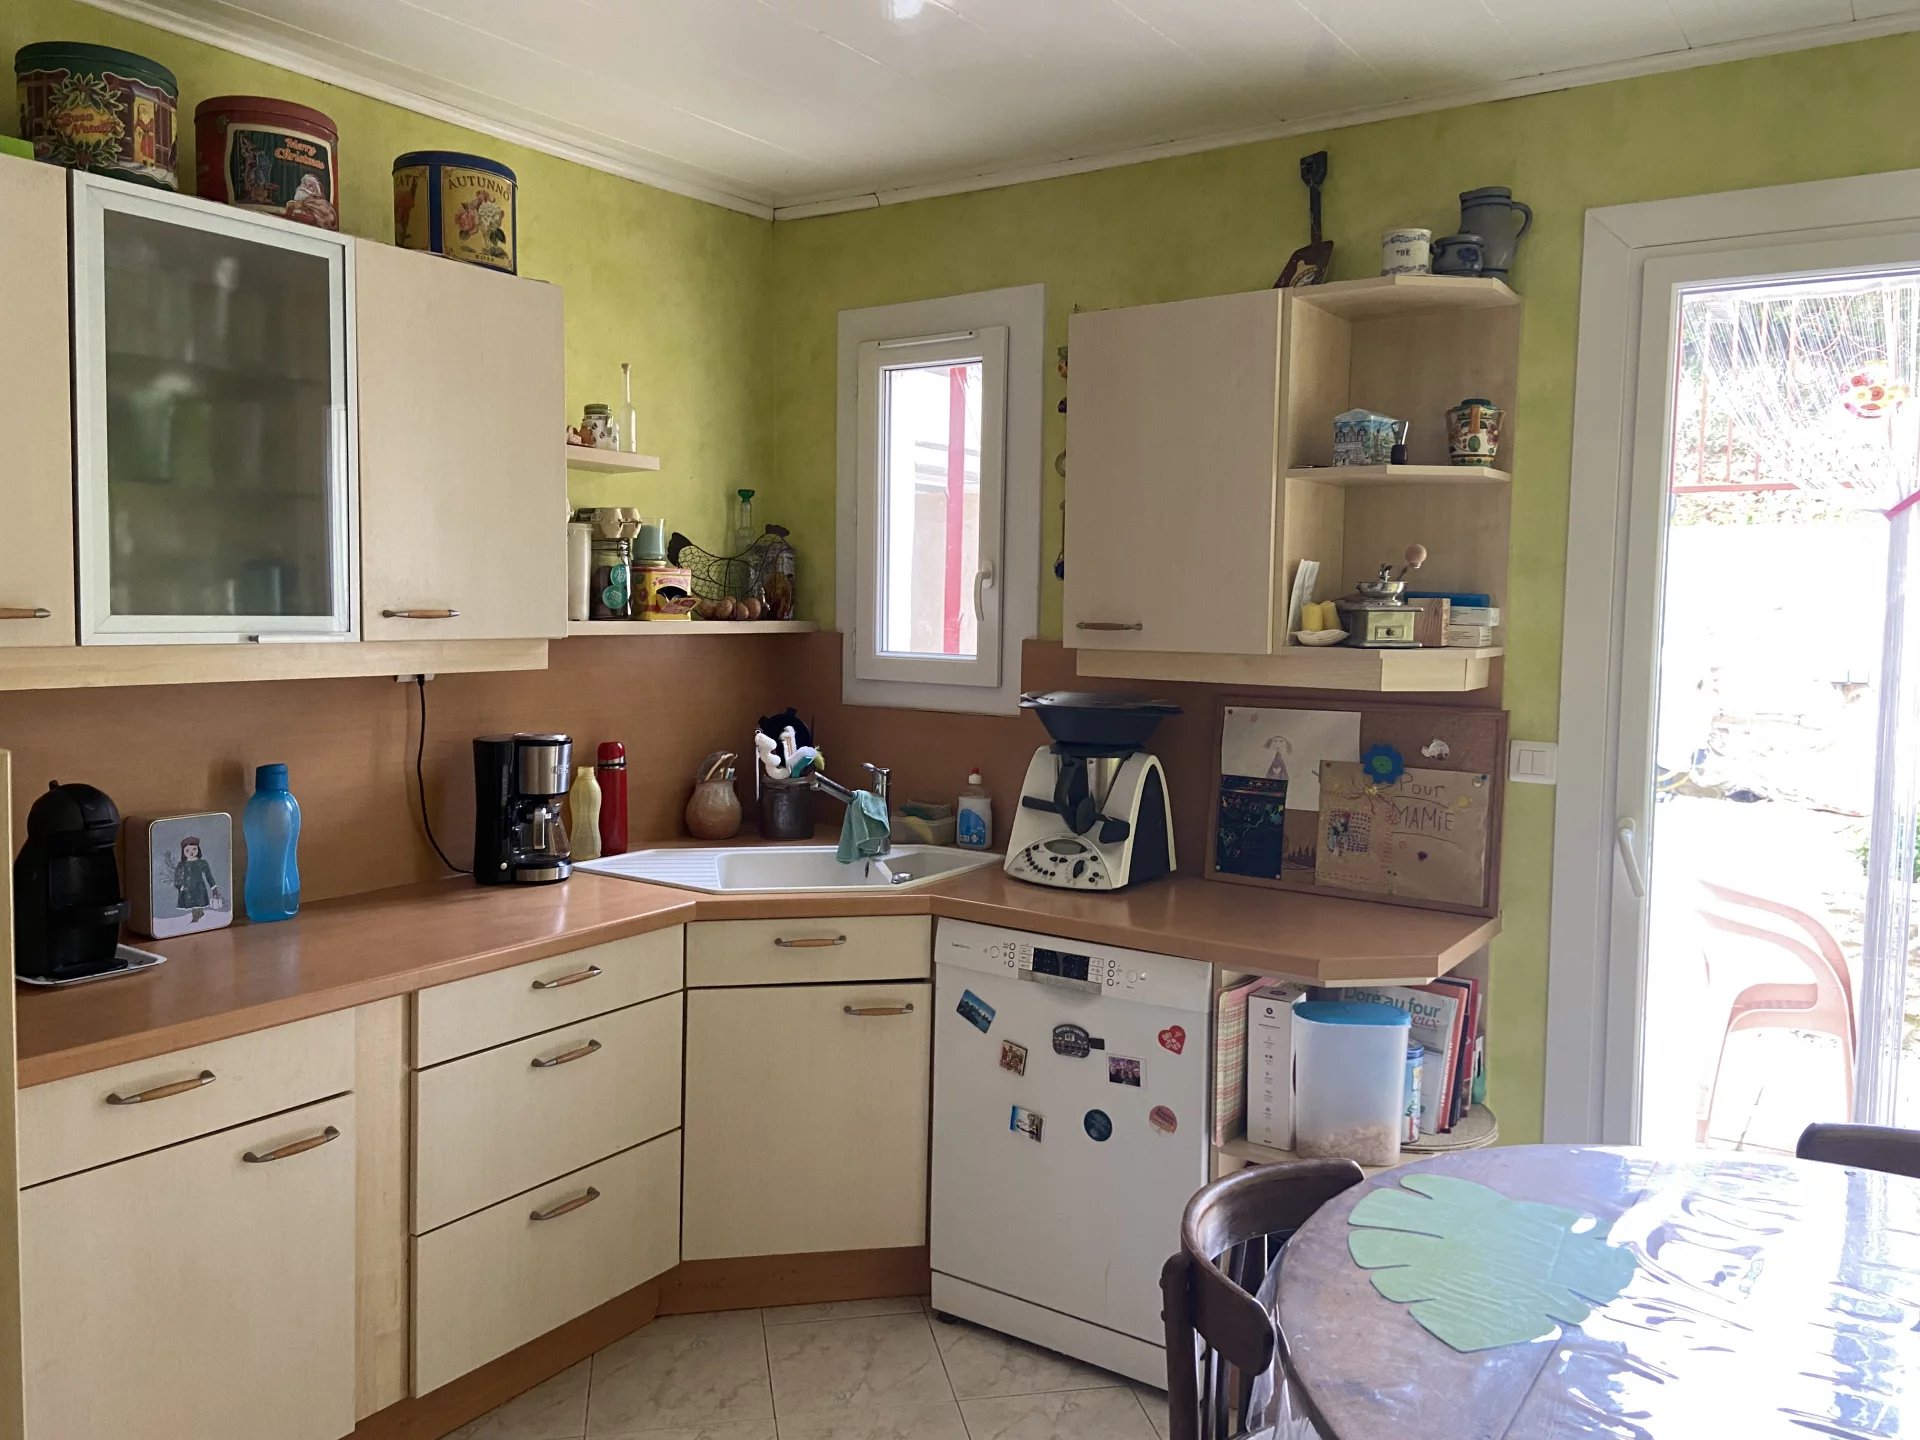 Le Val -4 bedrooms house on 314m2 fenced garden with electricity resale